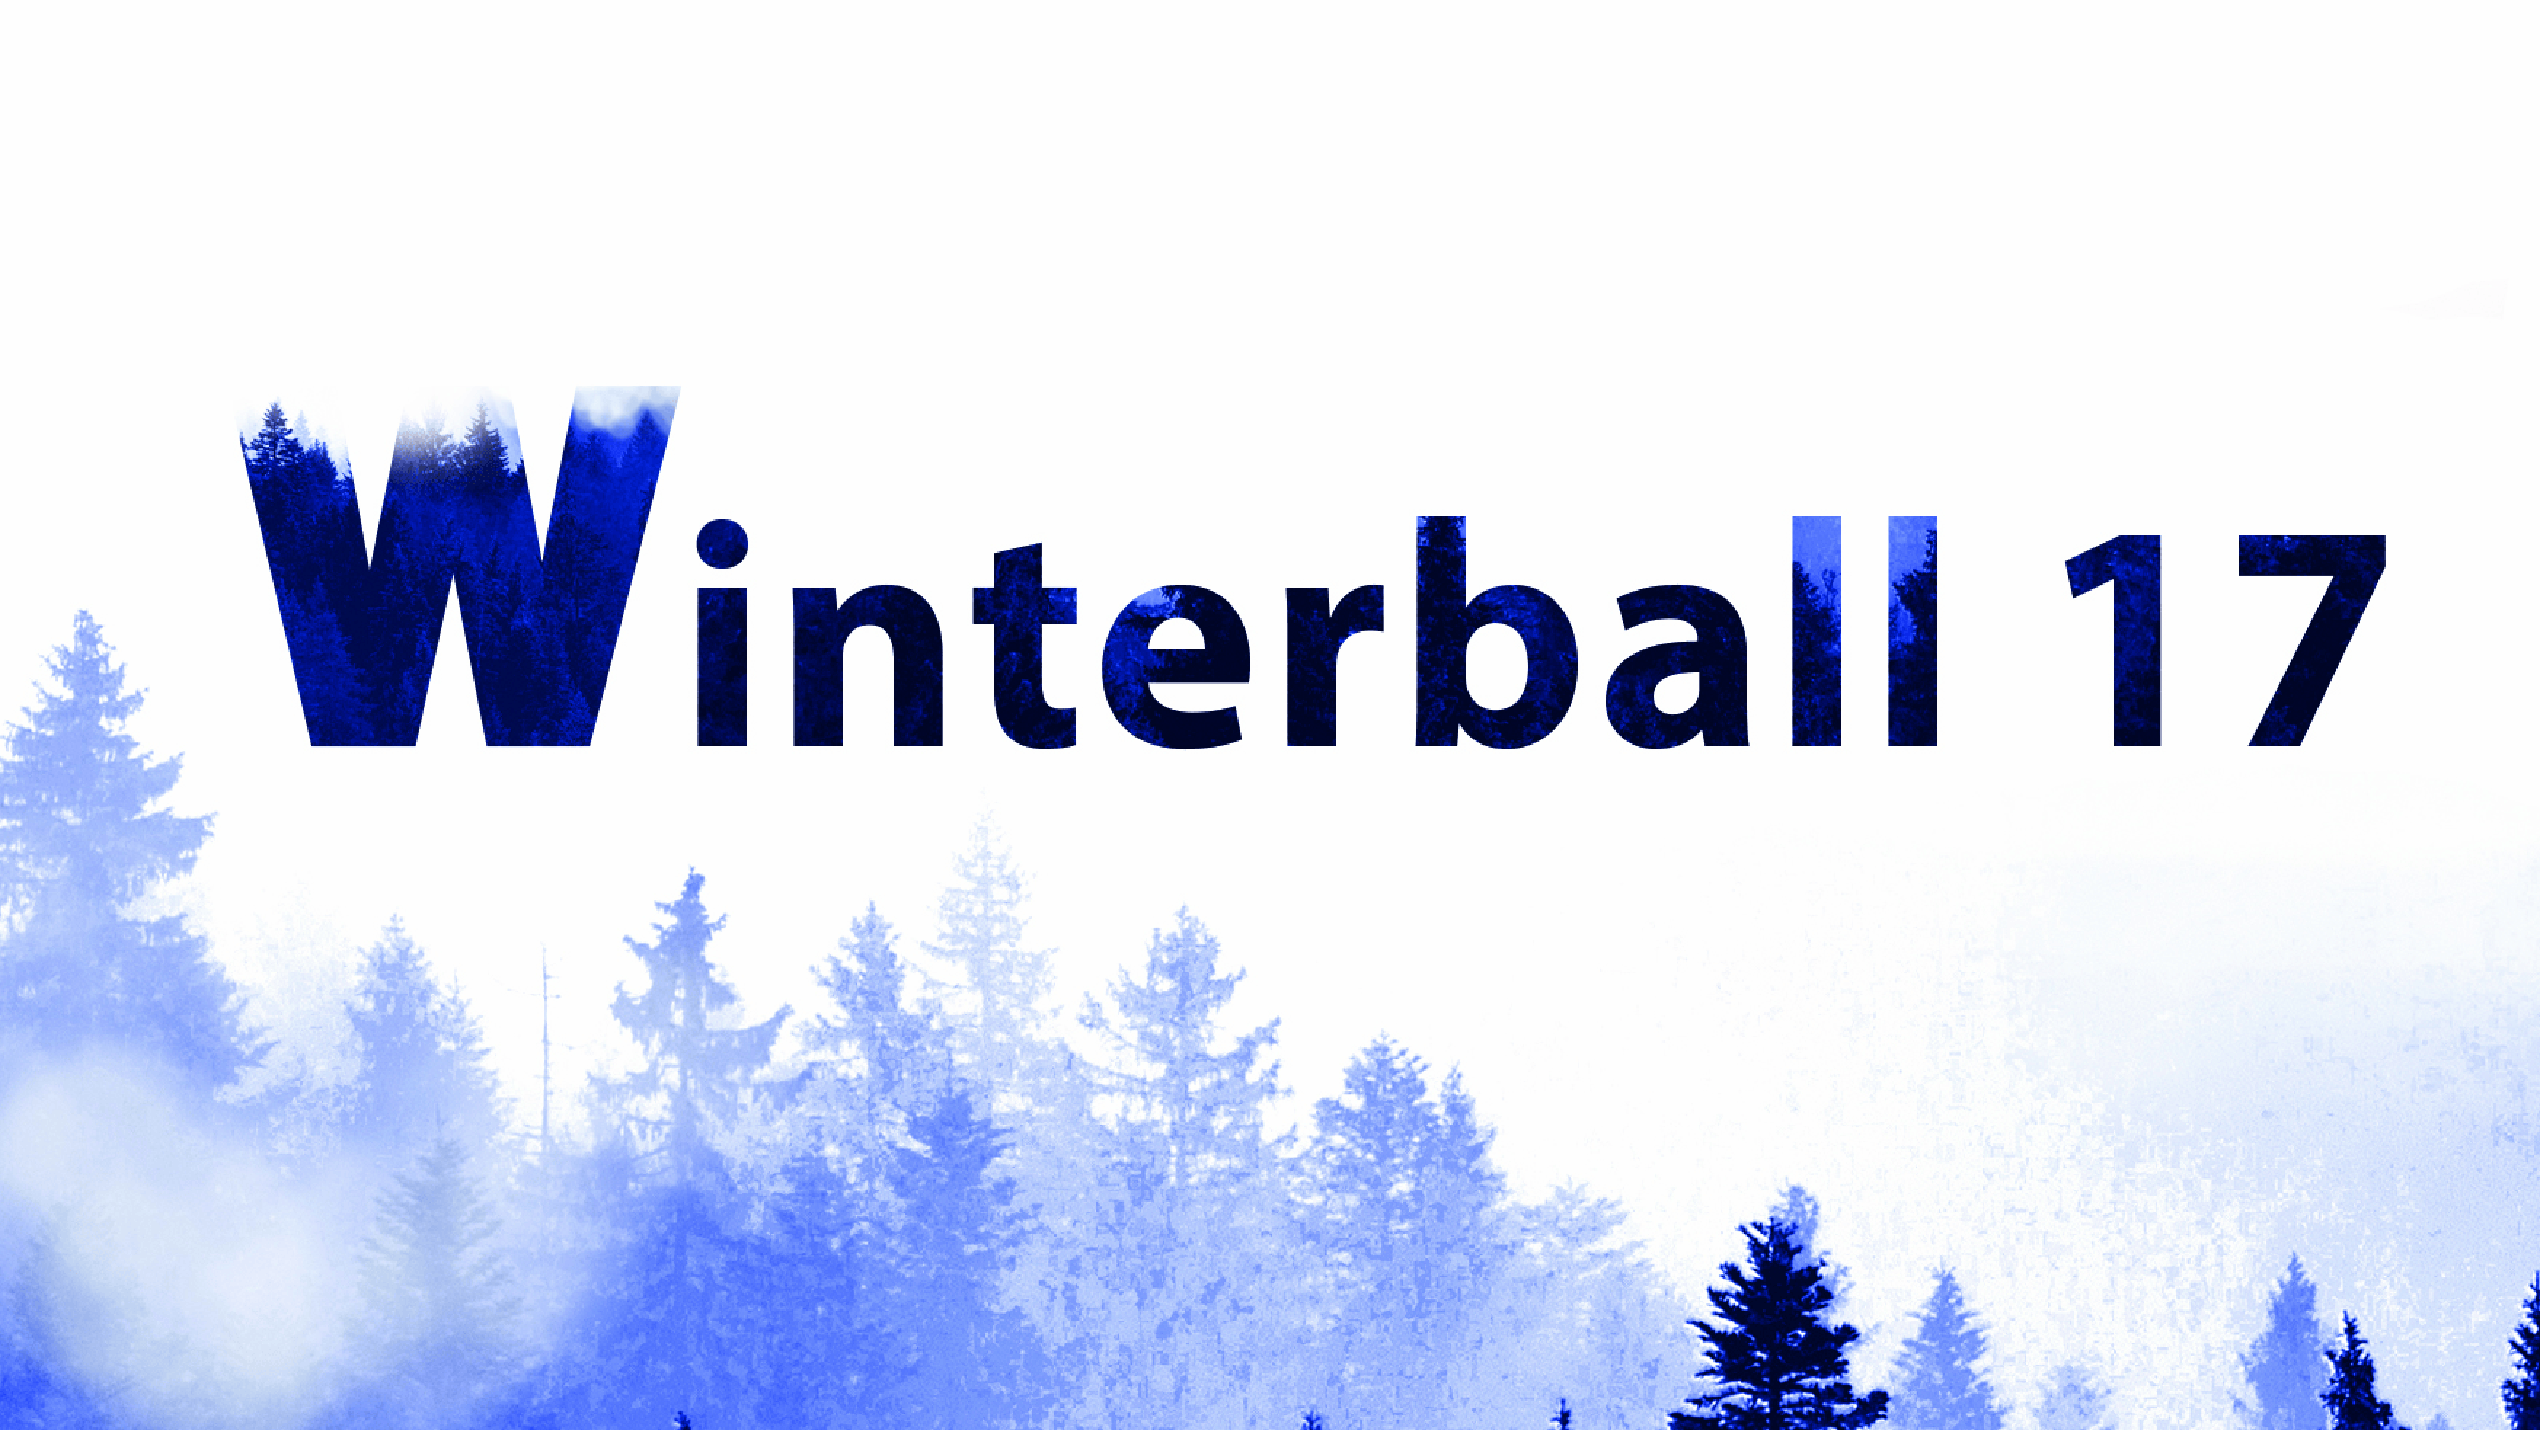 Last info about the Winter Ball